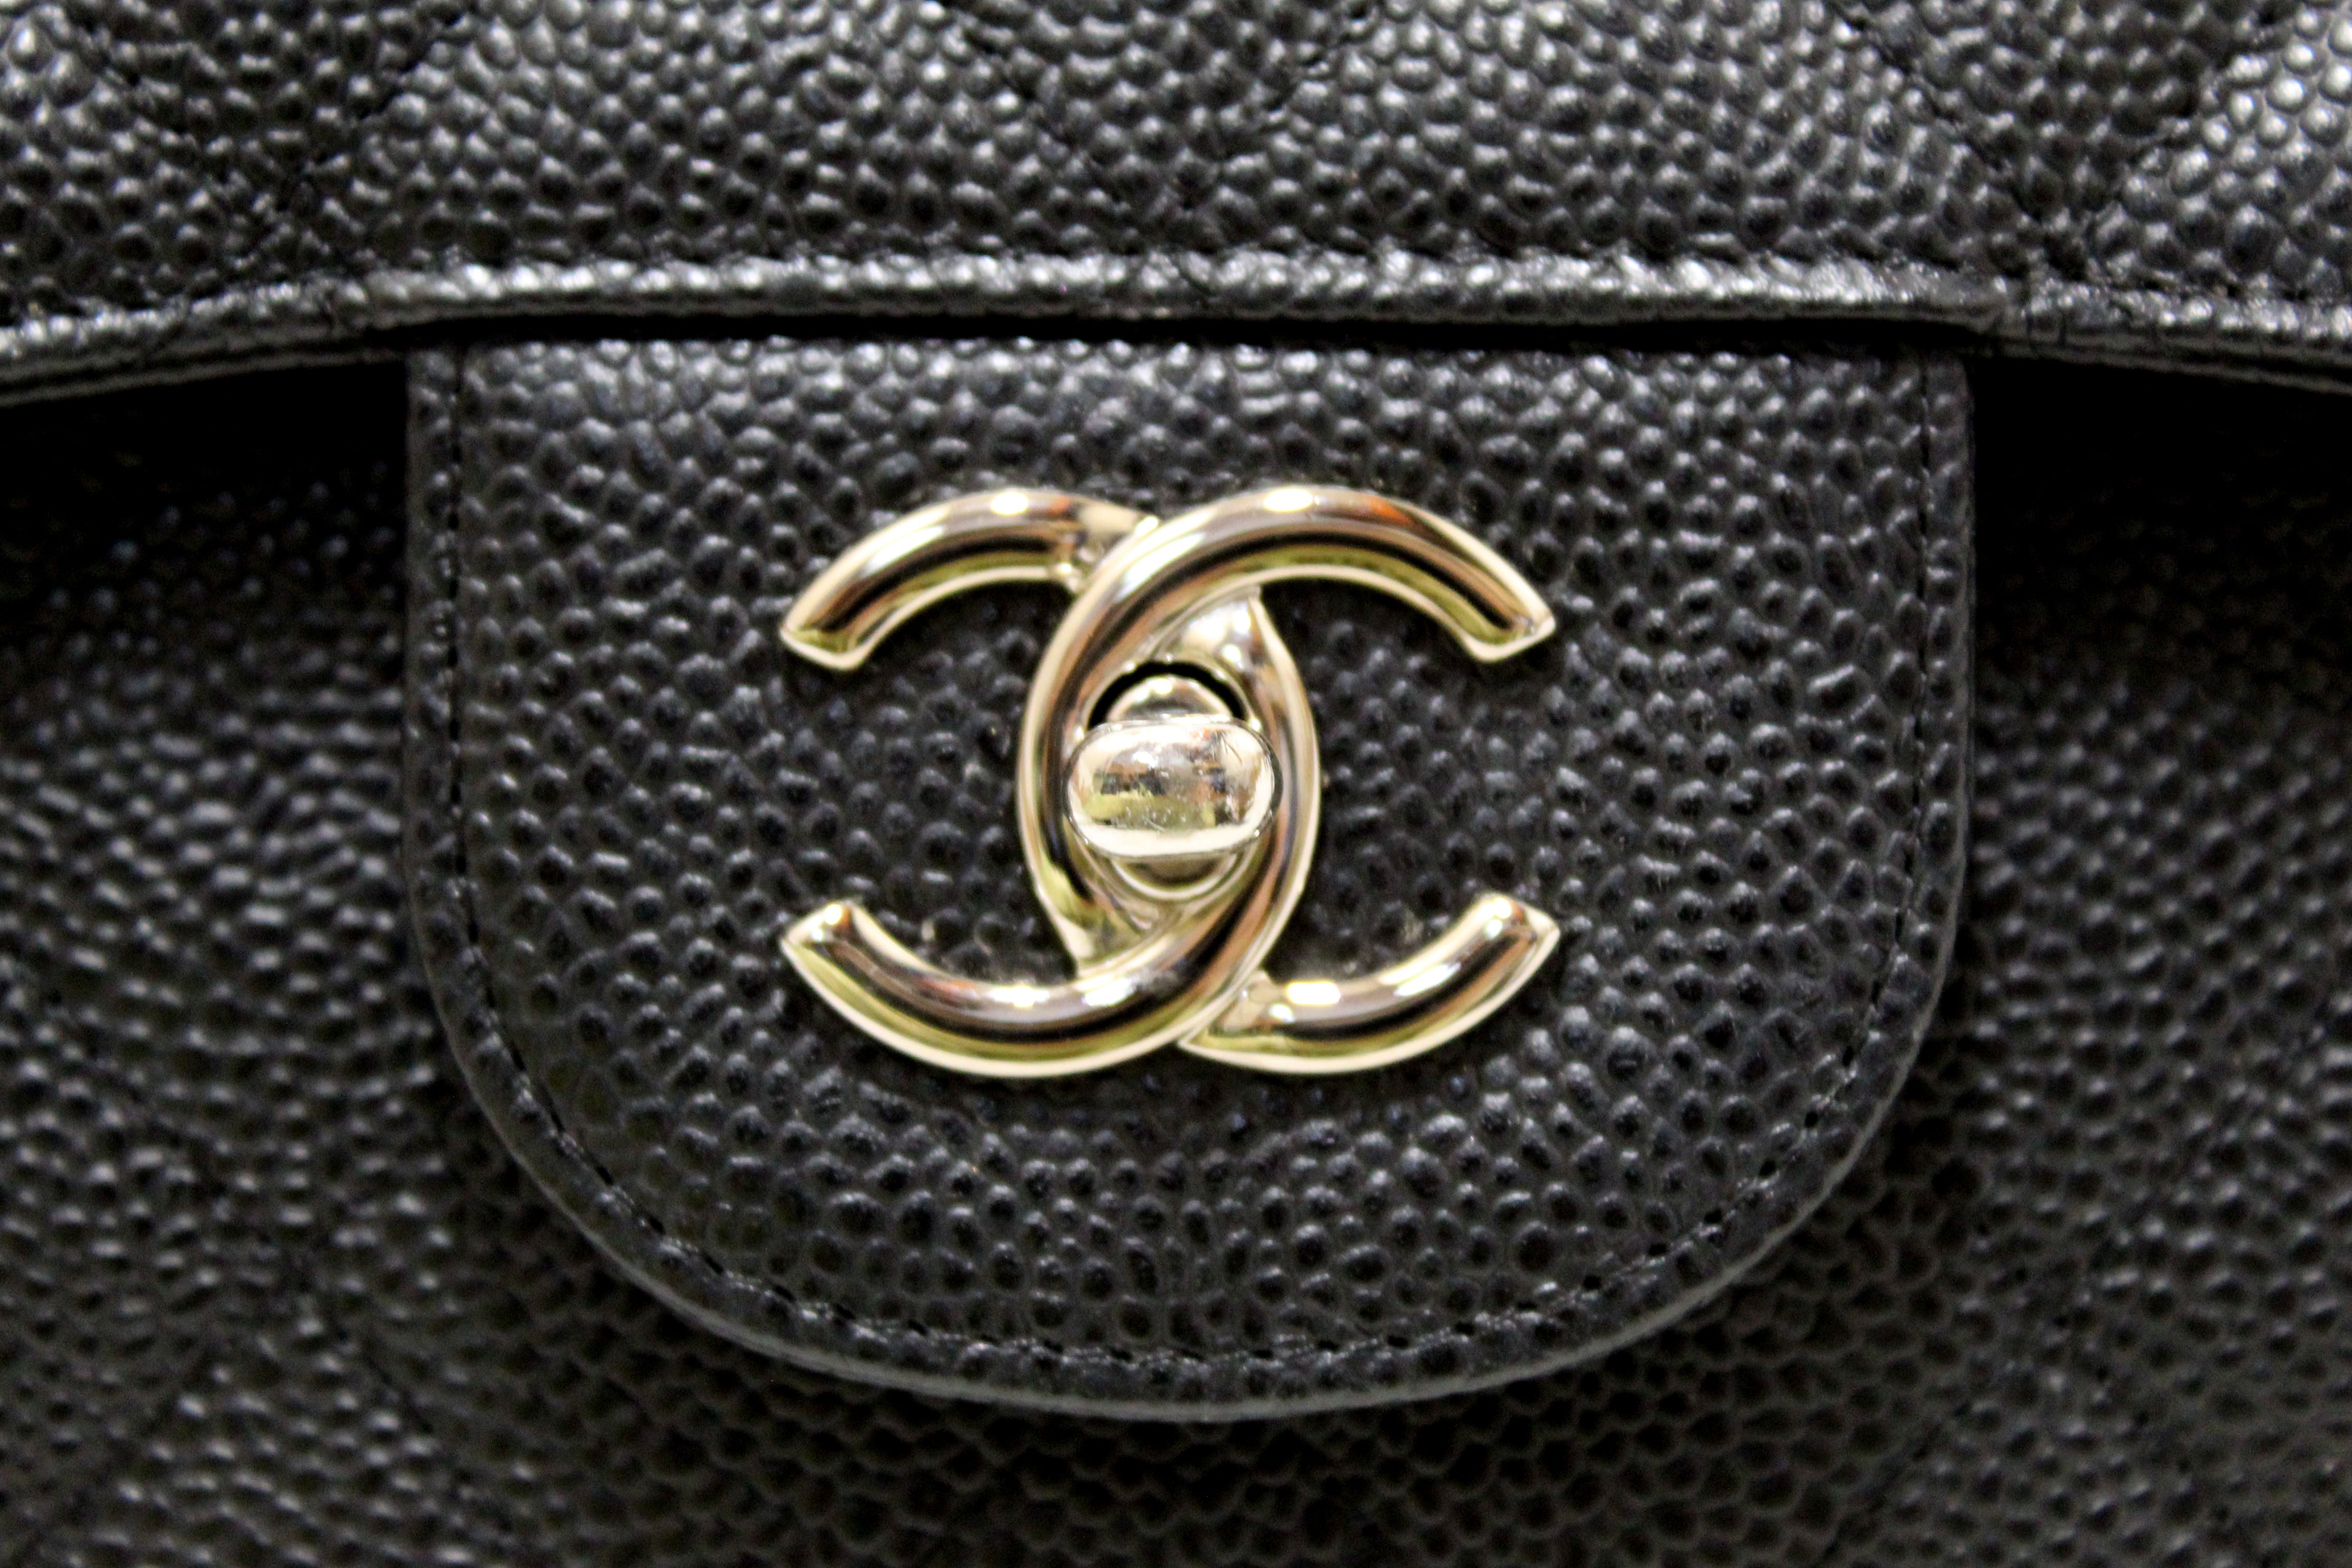 Authentic Chanel Black Quilted Caviar Leather Classic Jumbo Double Flap Bag